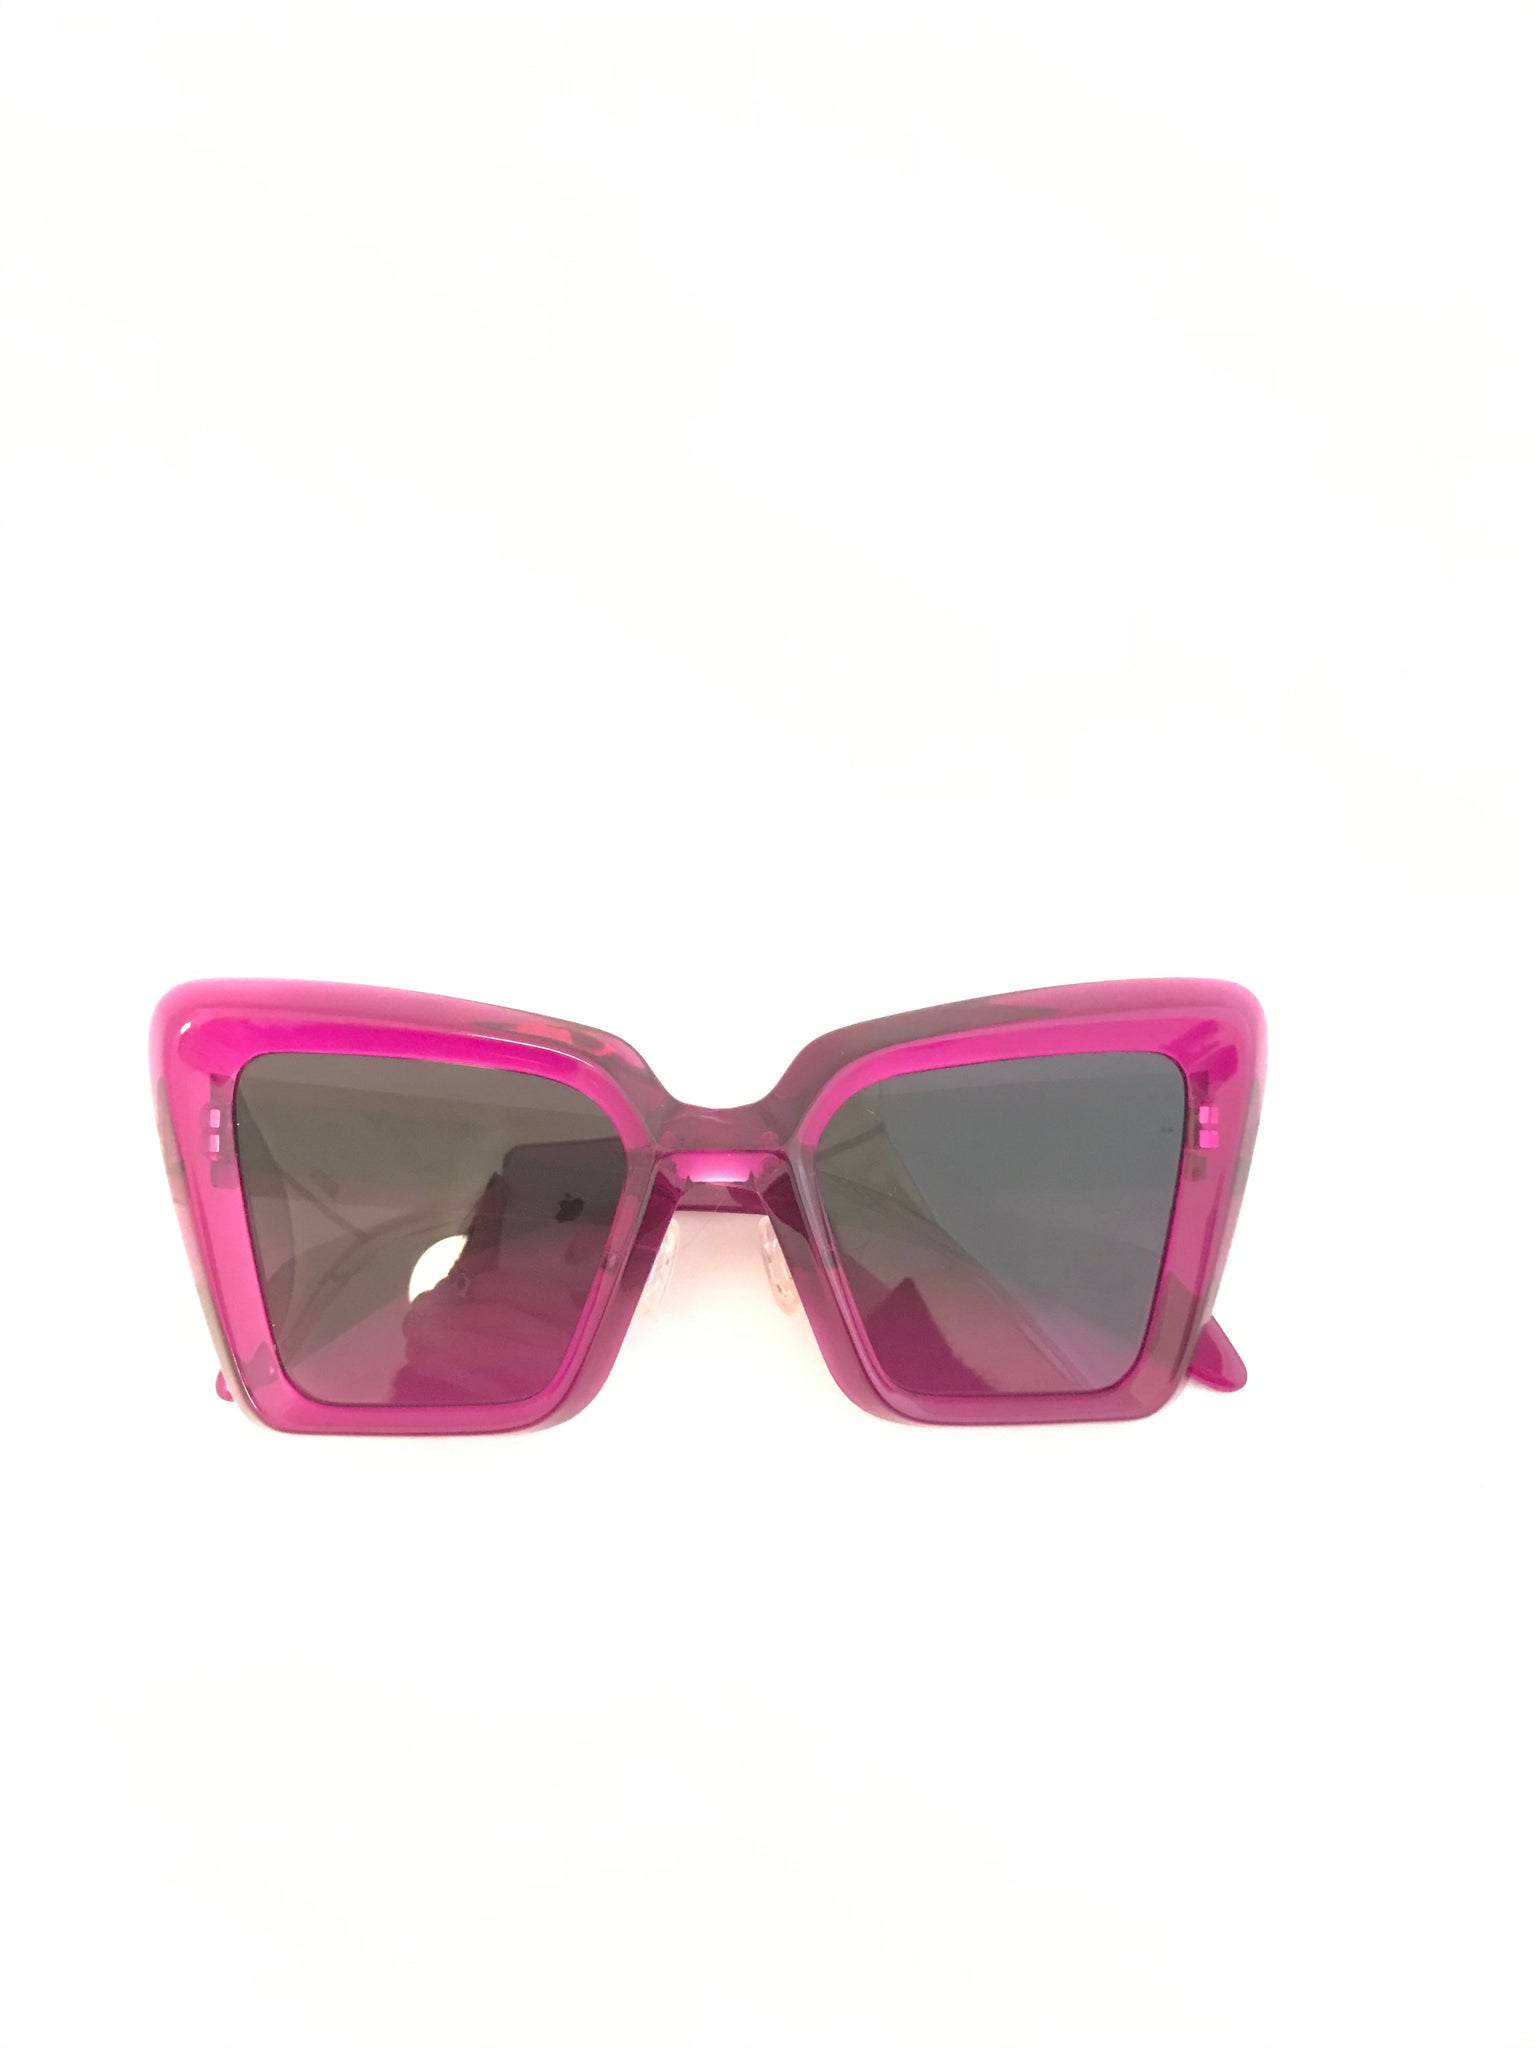 Limited Edition 'Sly' Sunglasses